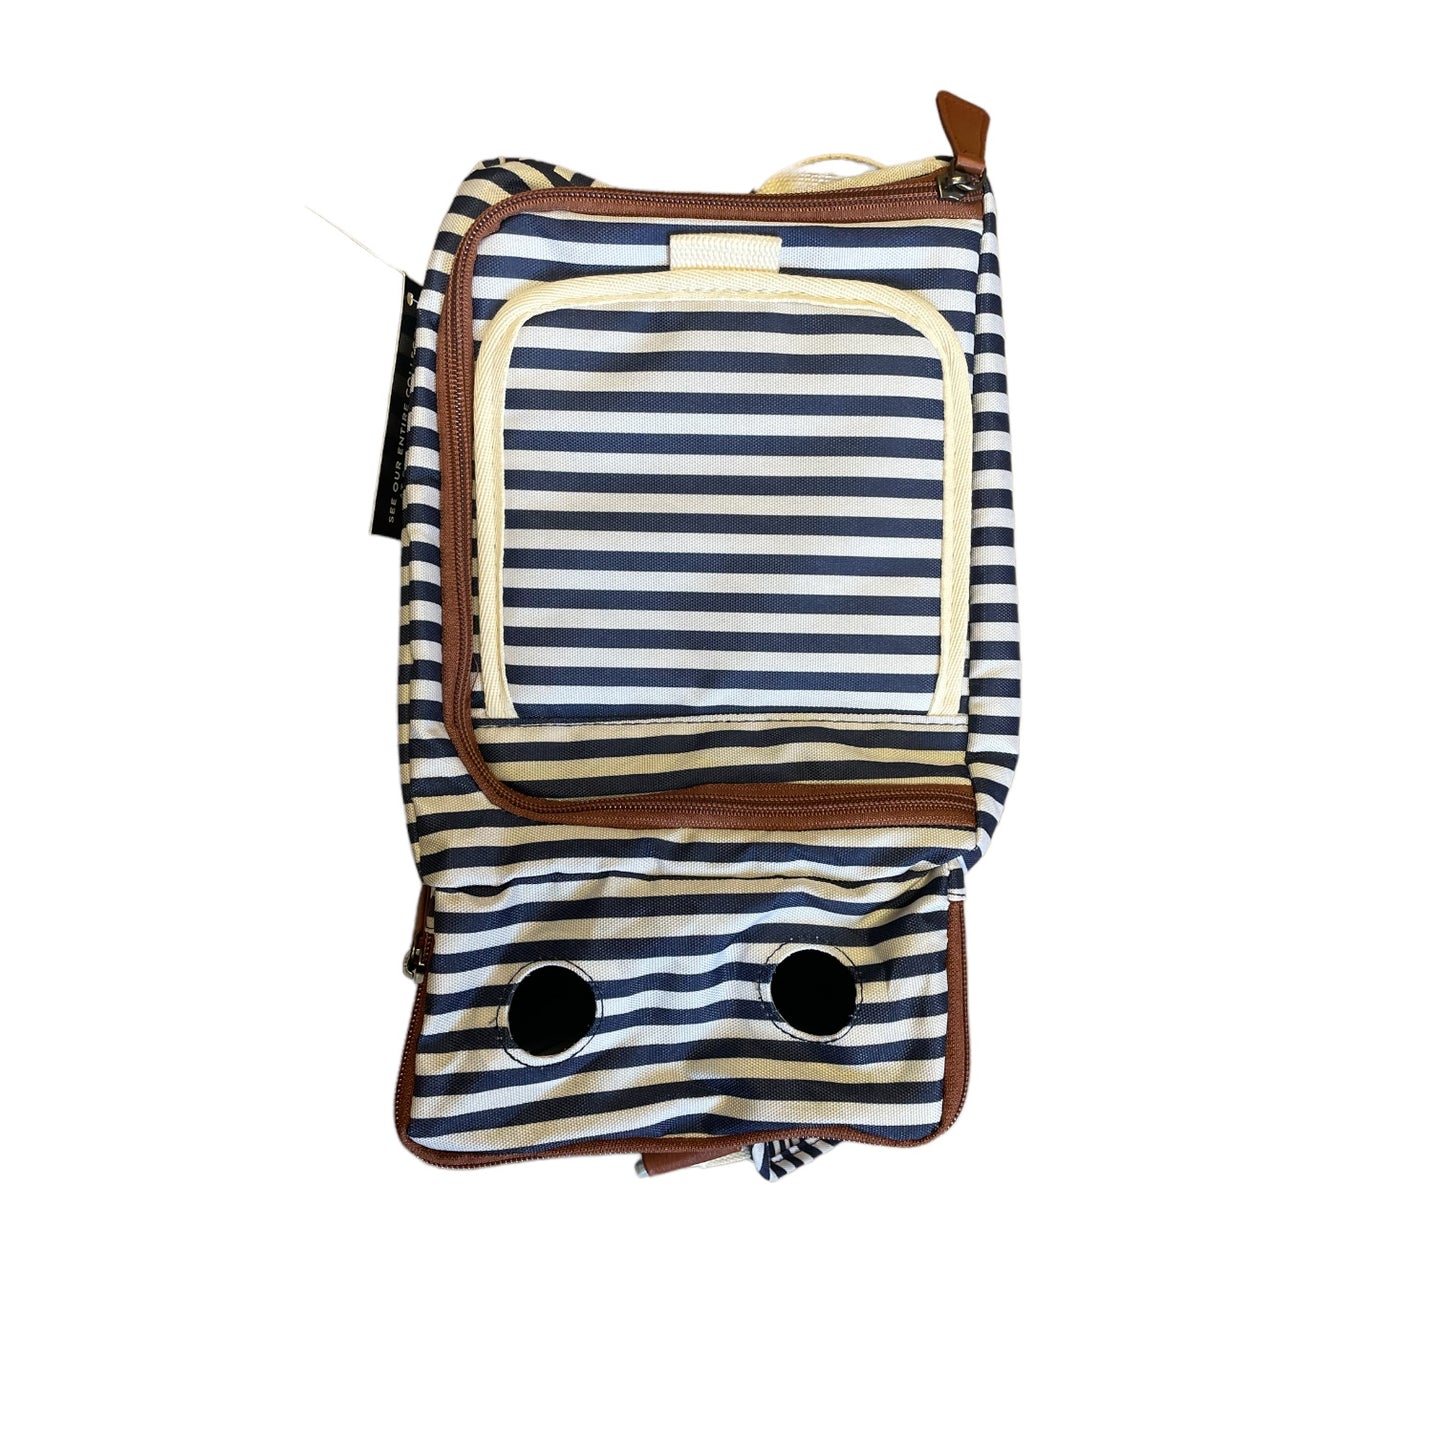 Fit & Fresh Insulated Cooler With Dual Wine Compartment, Navy and White Stripes